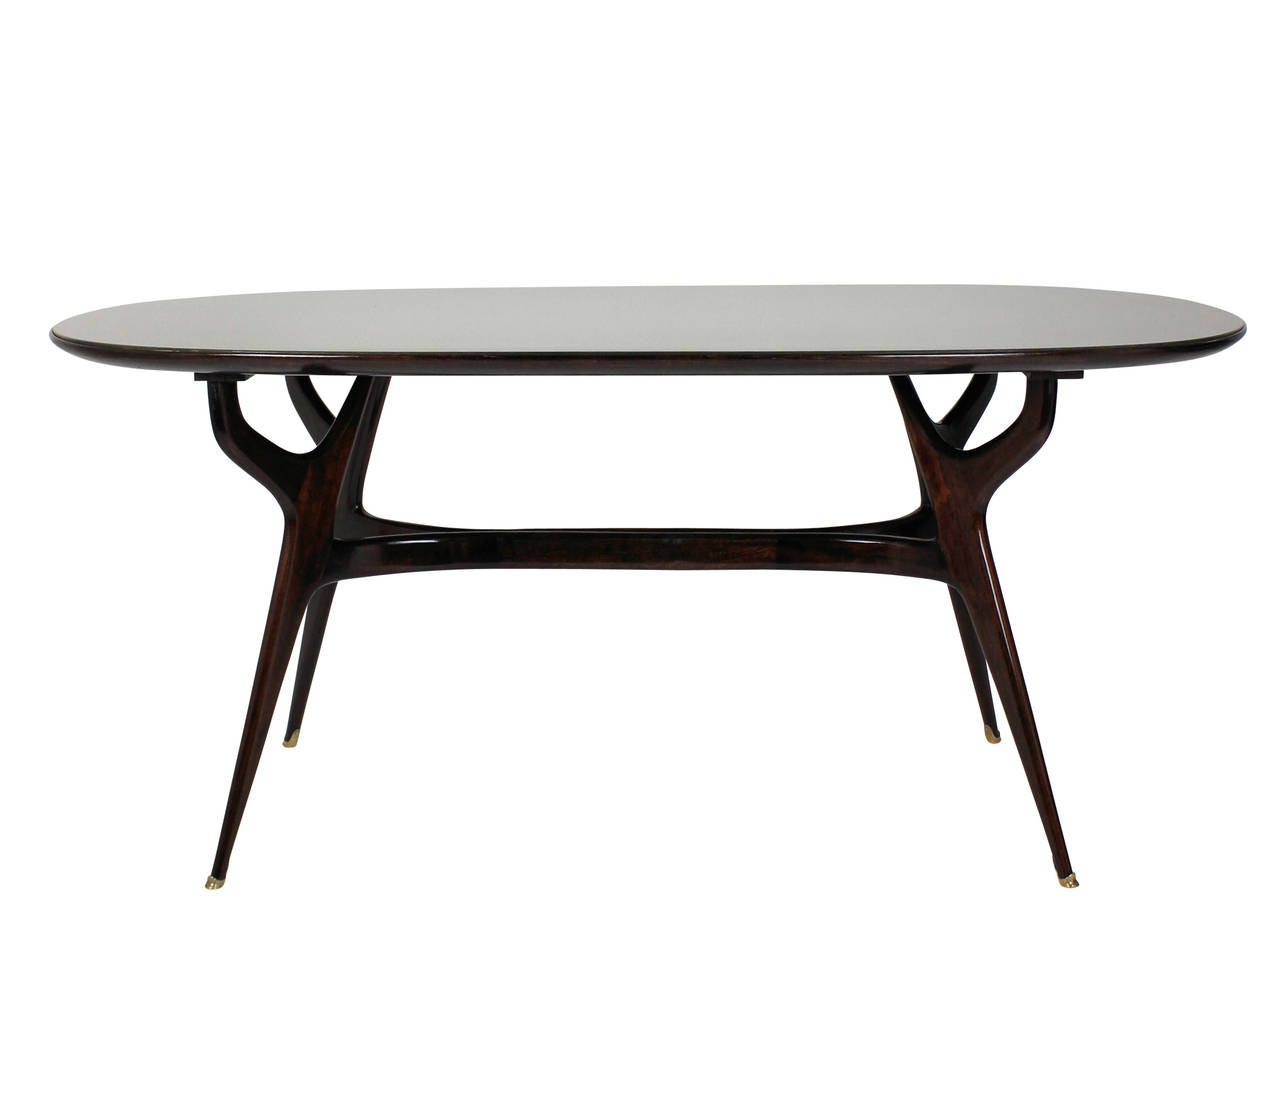 Italian Sculptural Dinning Table Attributed to Ico Parisi